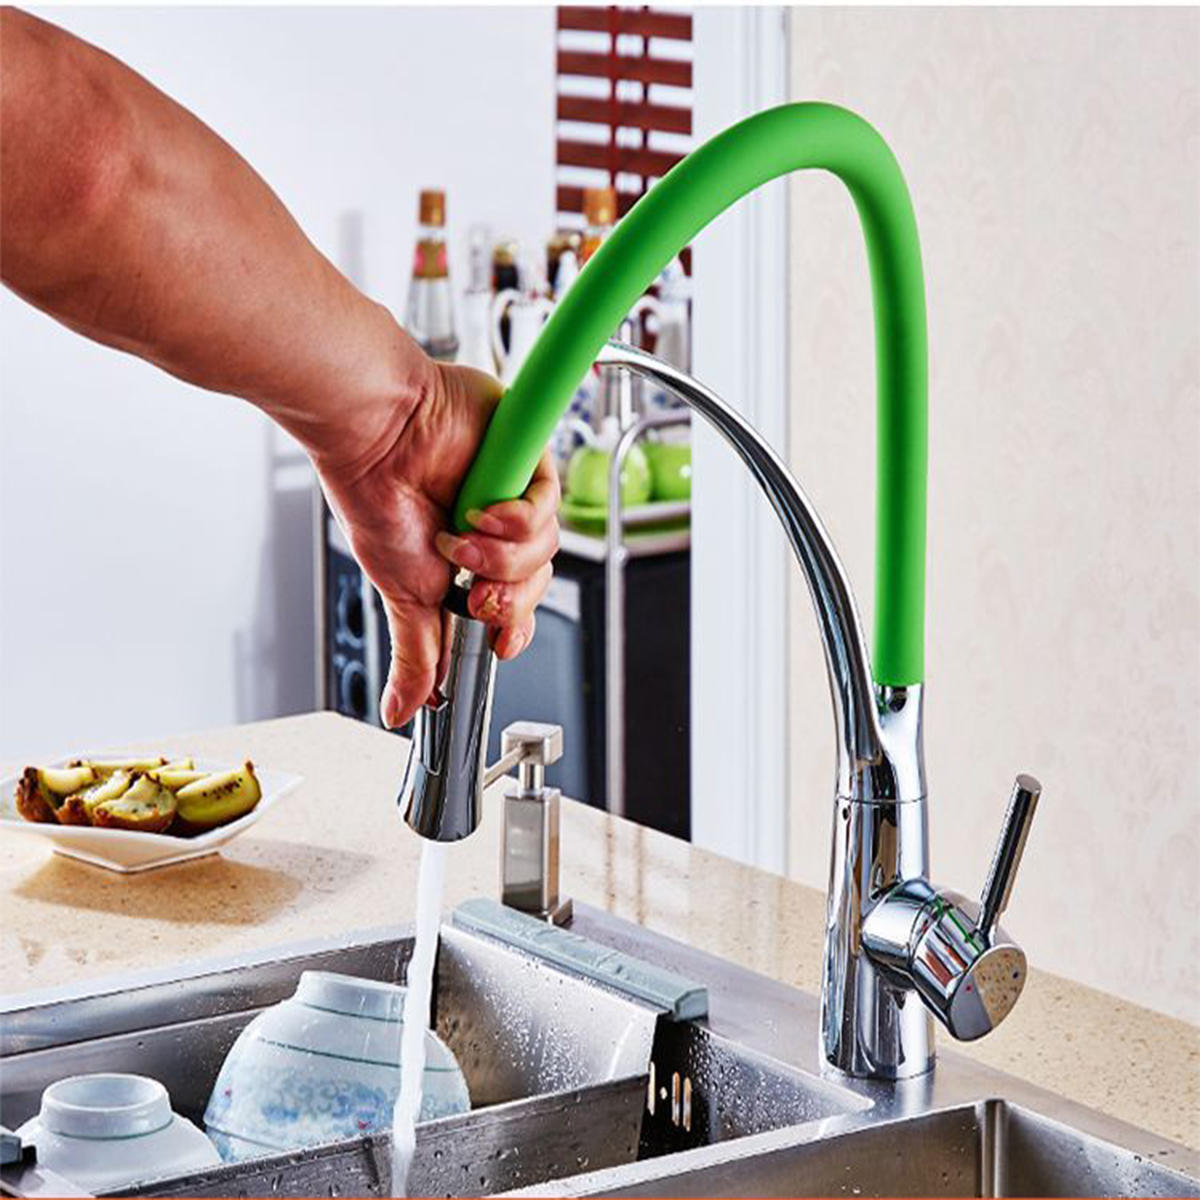 Kitchen Basin Sink Faucet 360° Rotation Pull Out Sprayer Hot Cold Mixer Tap Single Handle Brass Finish Deck Mount